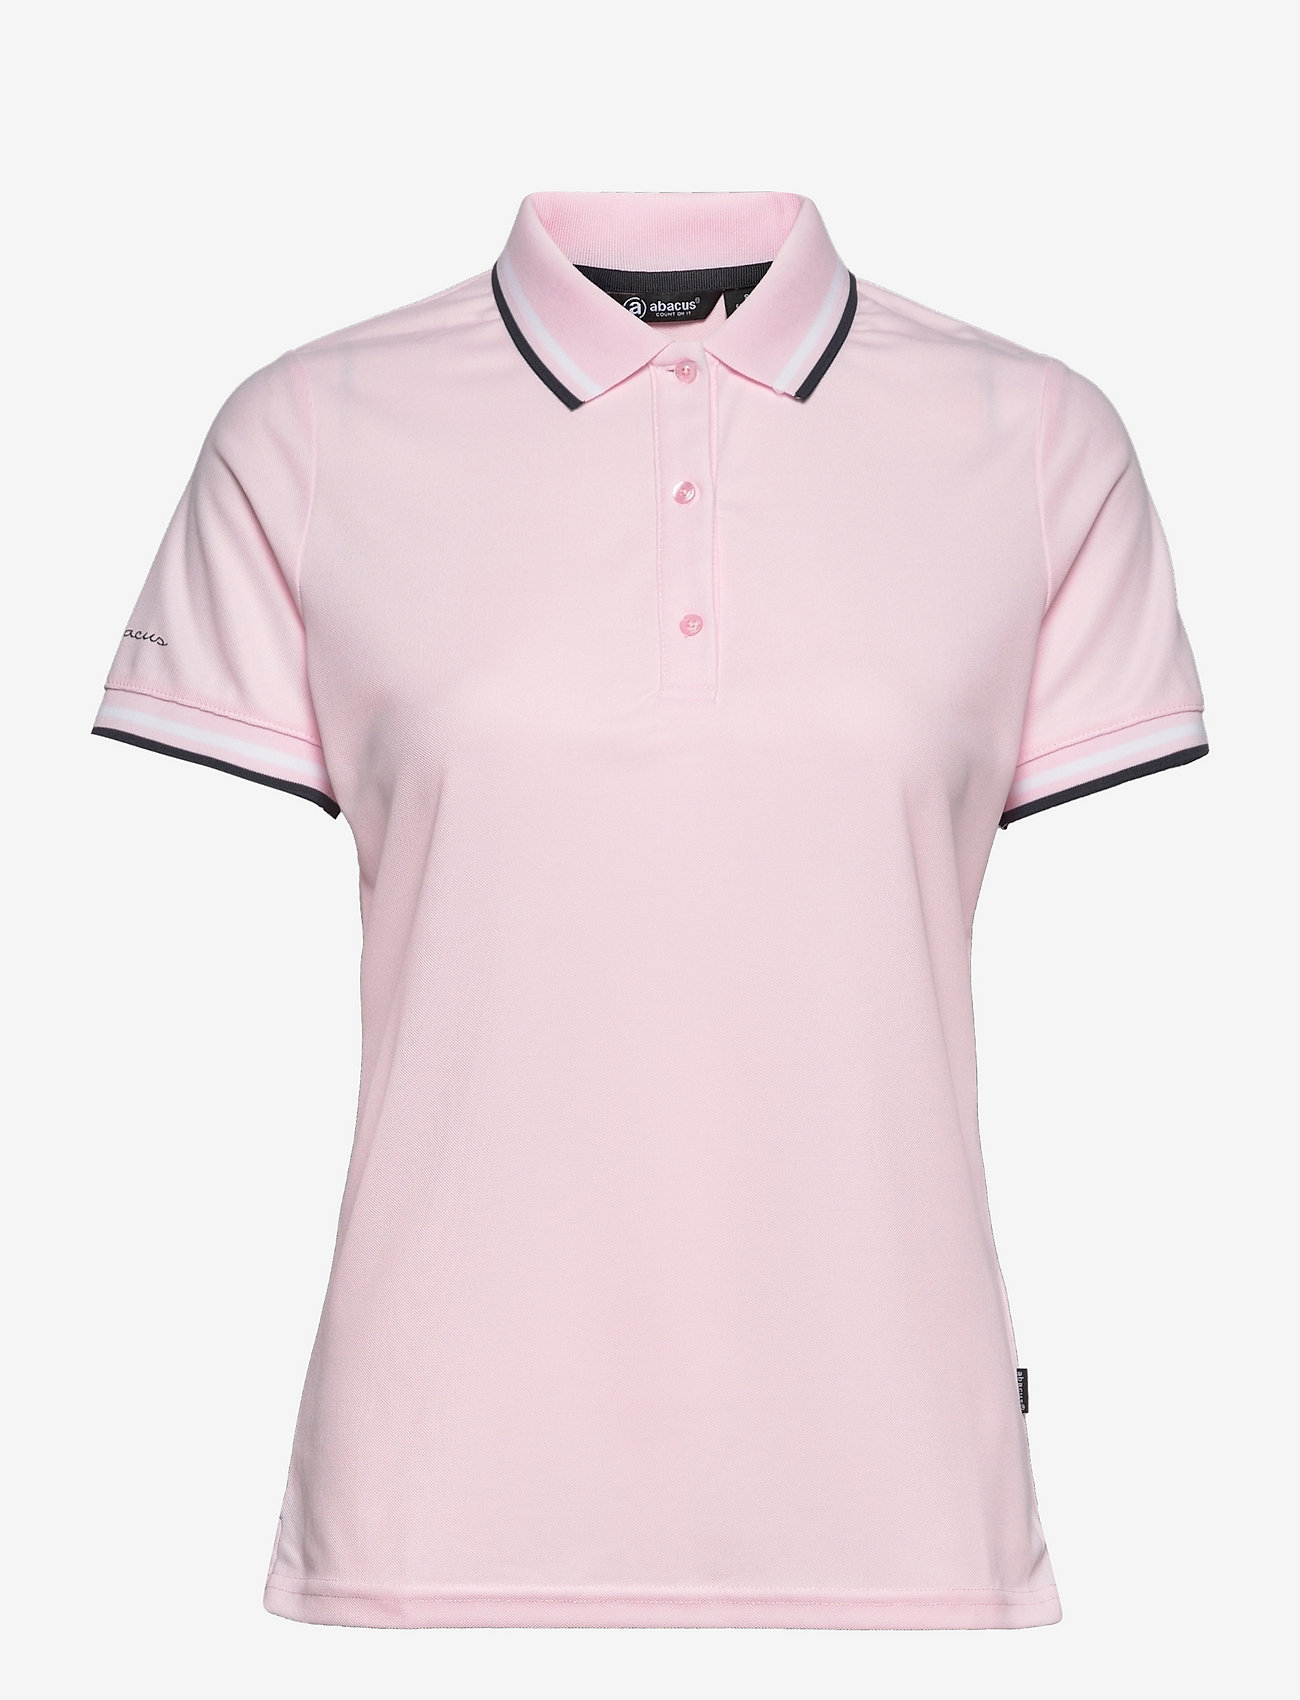 Abacus - Lds Pines polo - pikéer - lt.pink - 0